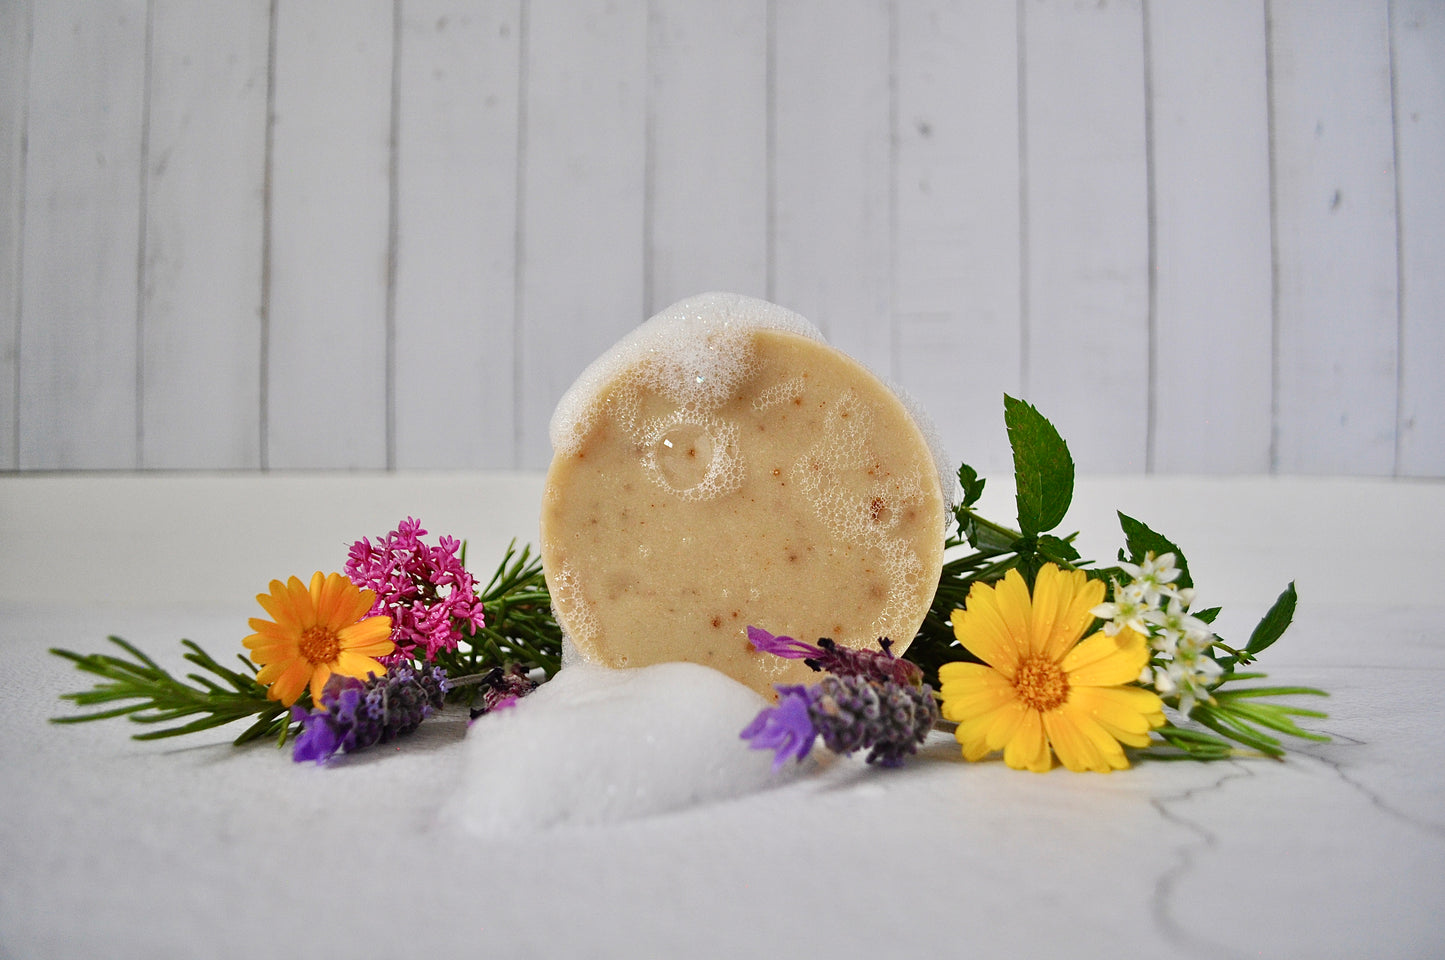 Herbs And Flowers - Handmade Soap